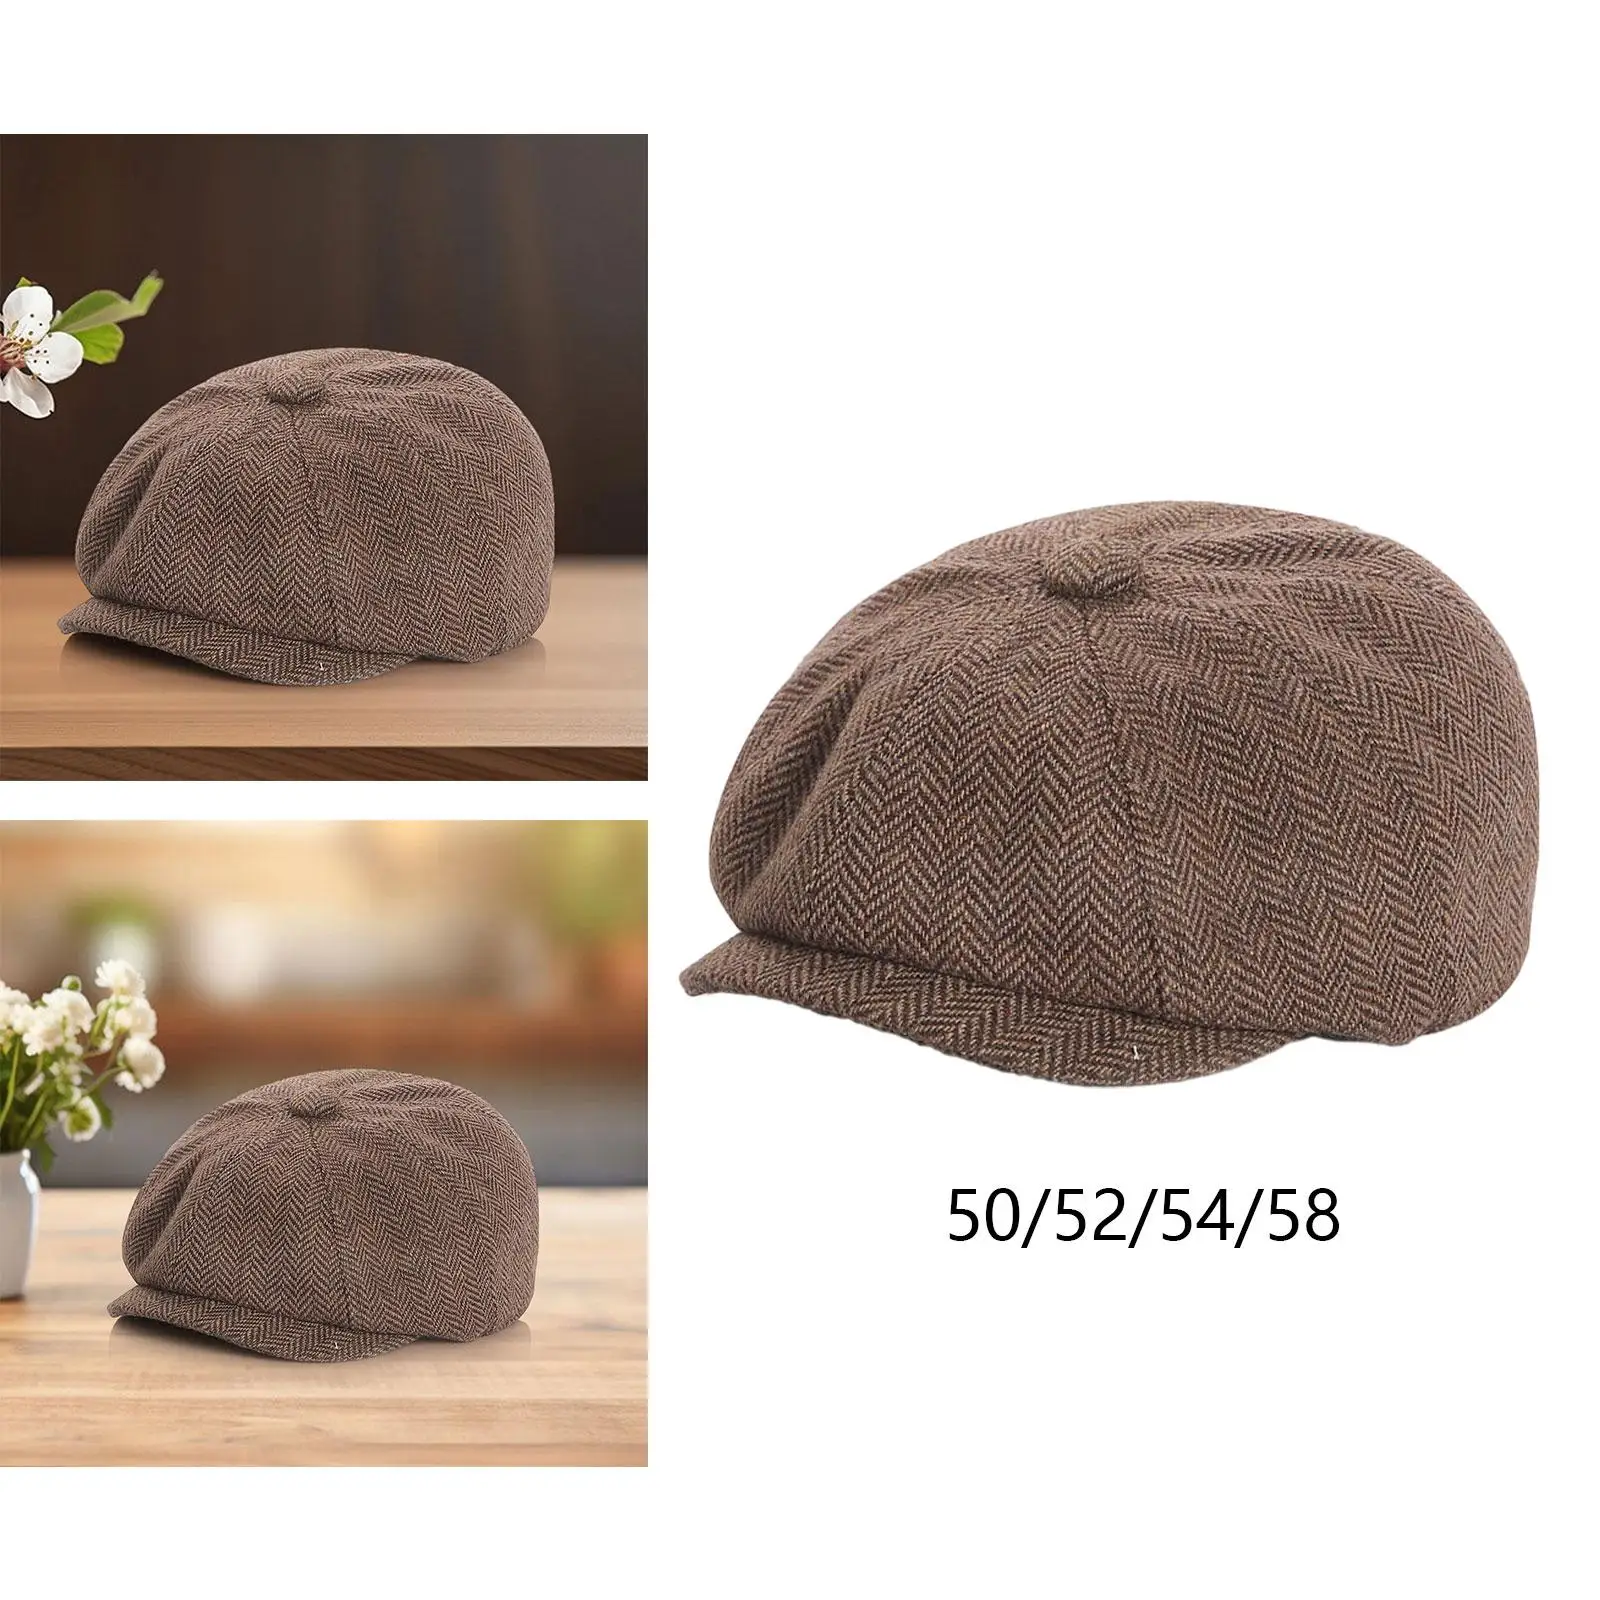 Beret Hat Cabbie Hat Spring Autumn Winter Classic Newsboy Hat Flat Cap Flat Hat for Camping Fishing Outdoor Travel Hiking